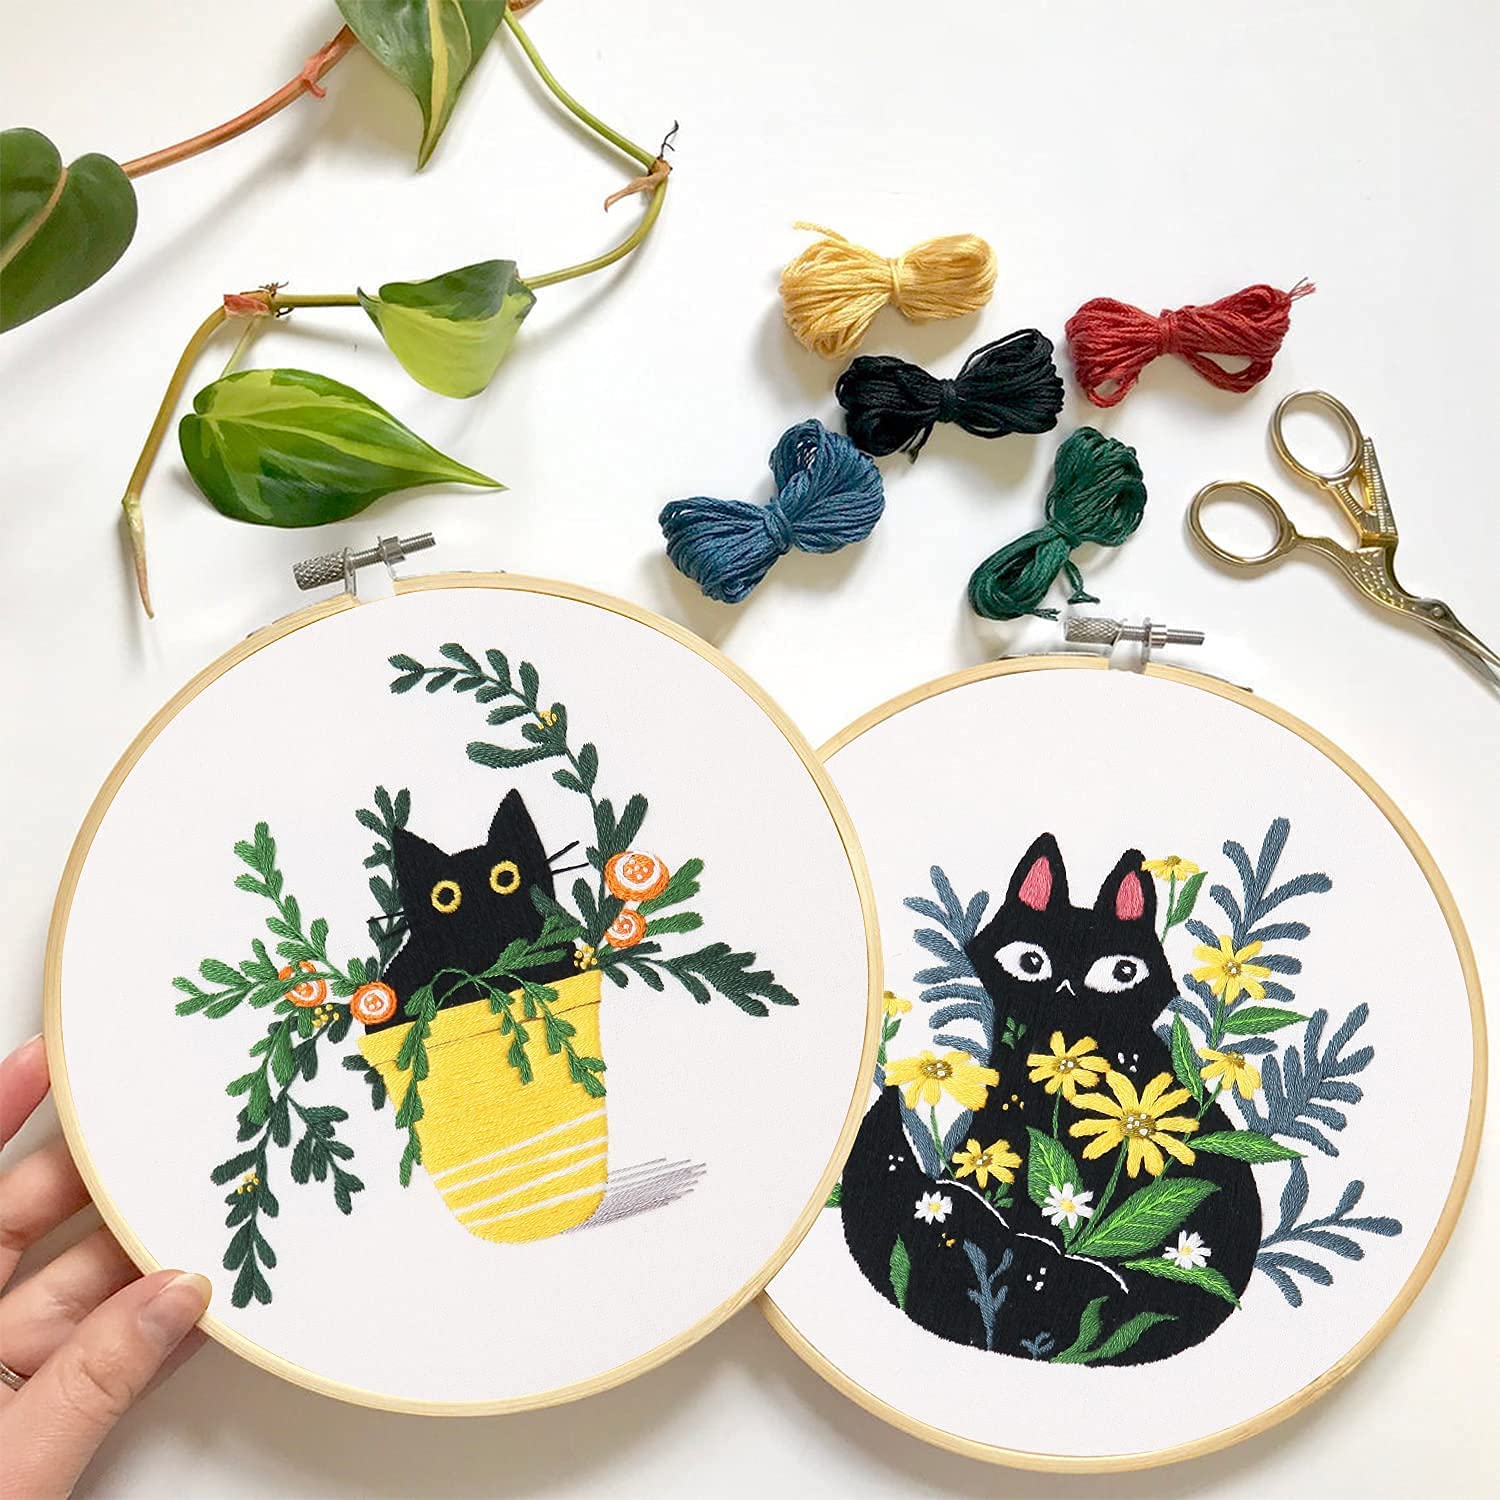 Modern Art Black Cat Embroidery Kit Cactus Plant Stamped Houseplant Cloth  Cross Stitch Kits with Bamboo Hoops – HeartCasa